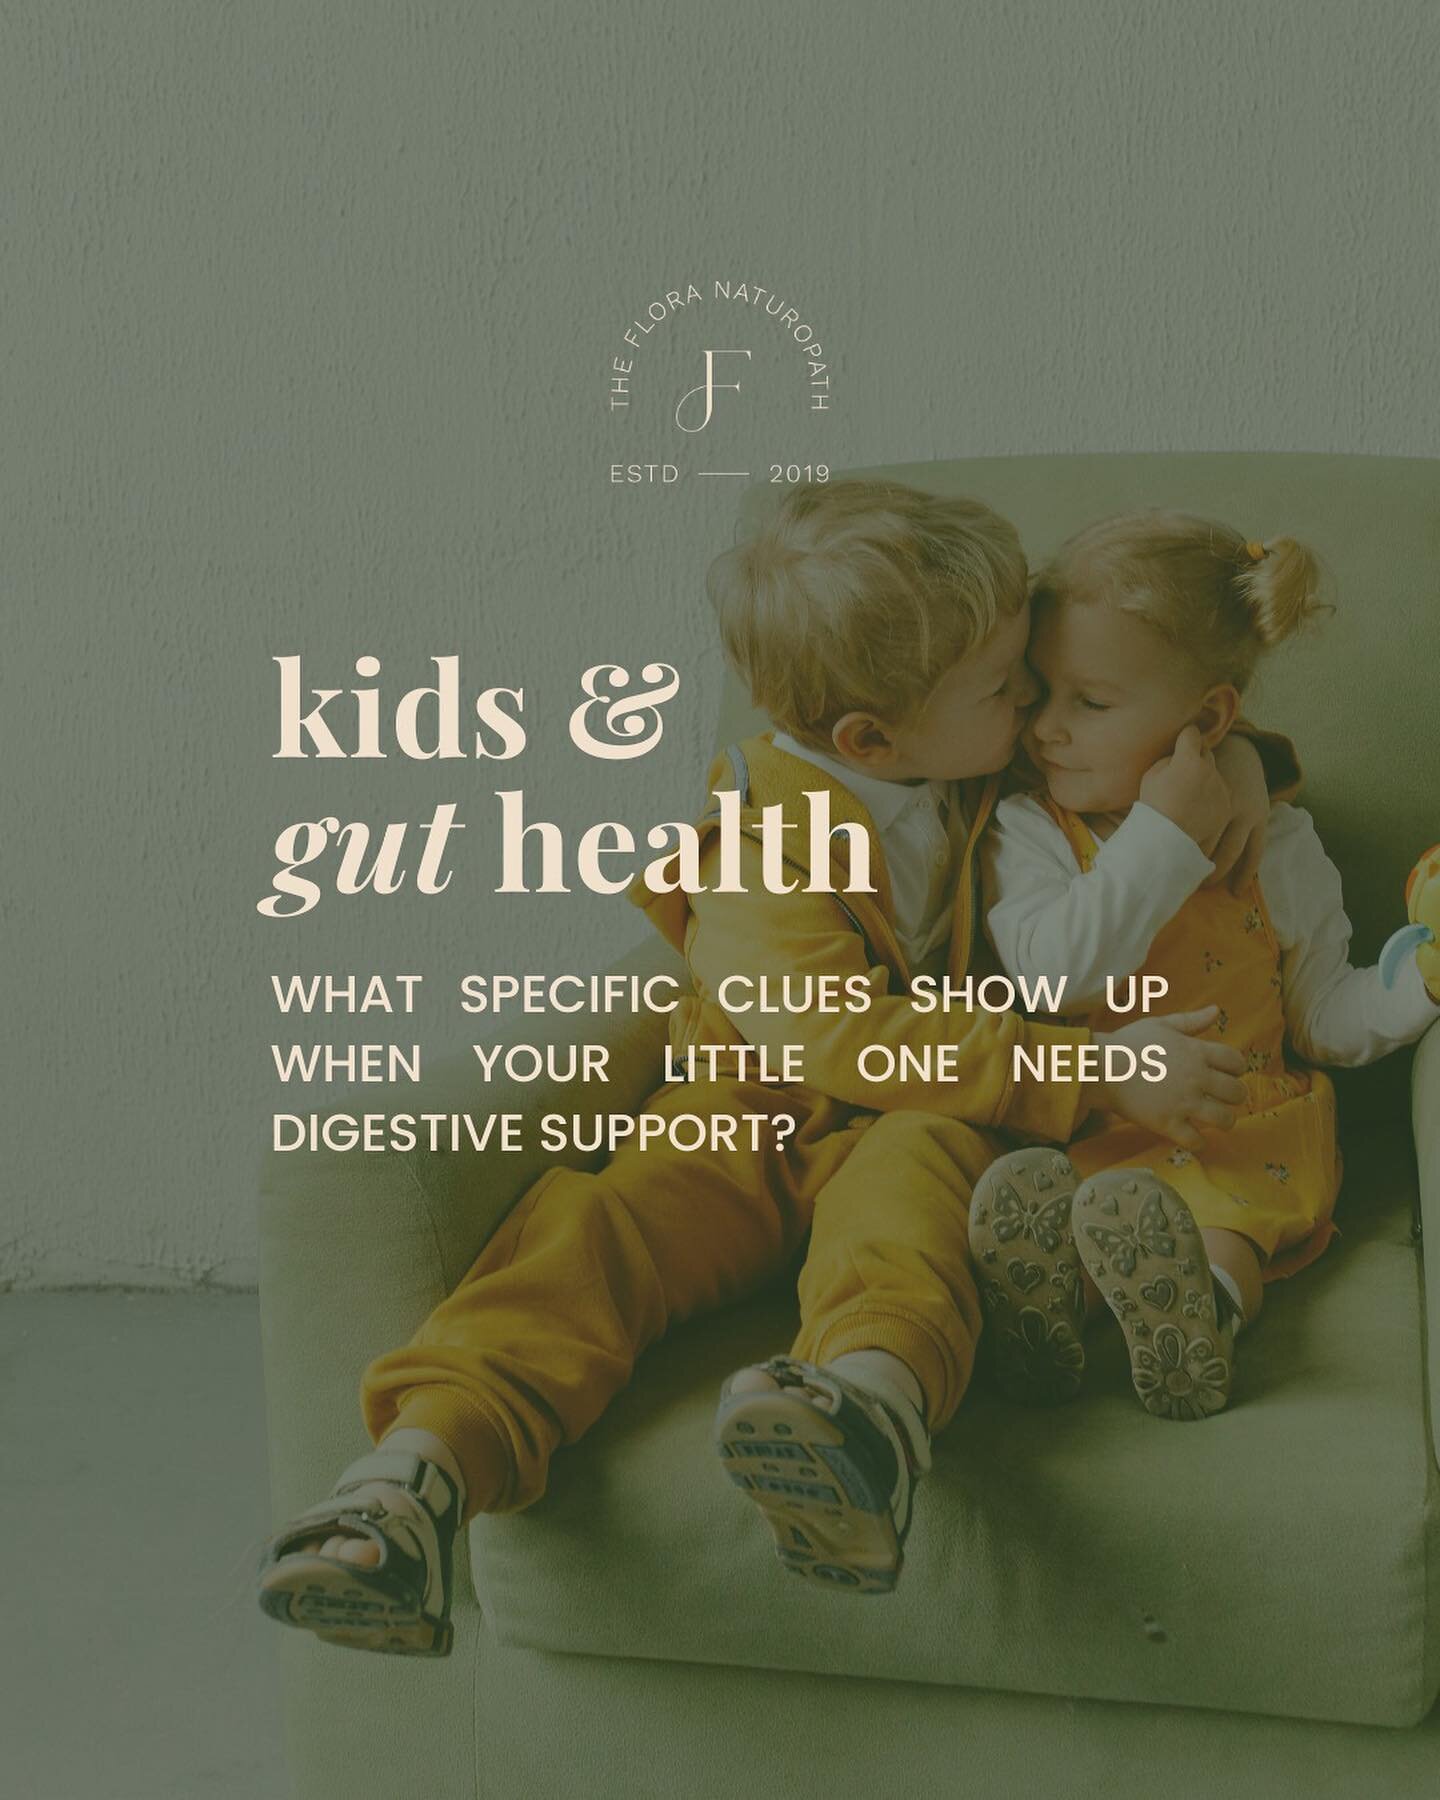 Understanding the importance of the microbiome in kids and implementing strategies to support its health is so important as kids grow. 
.
I&rsquo;m currently working on a short guide on how to support children&rsquo;s gut health and the microbiome, w